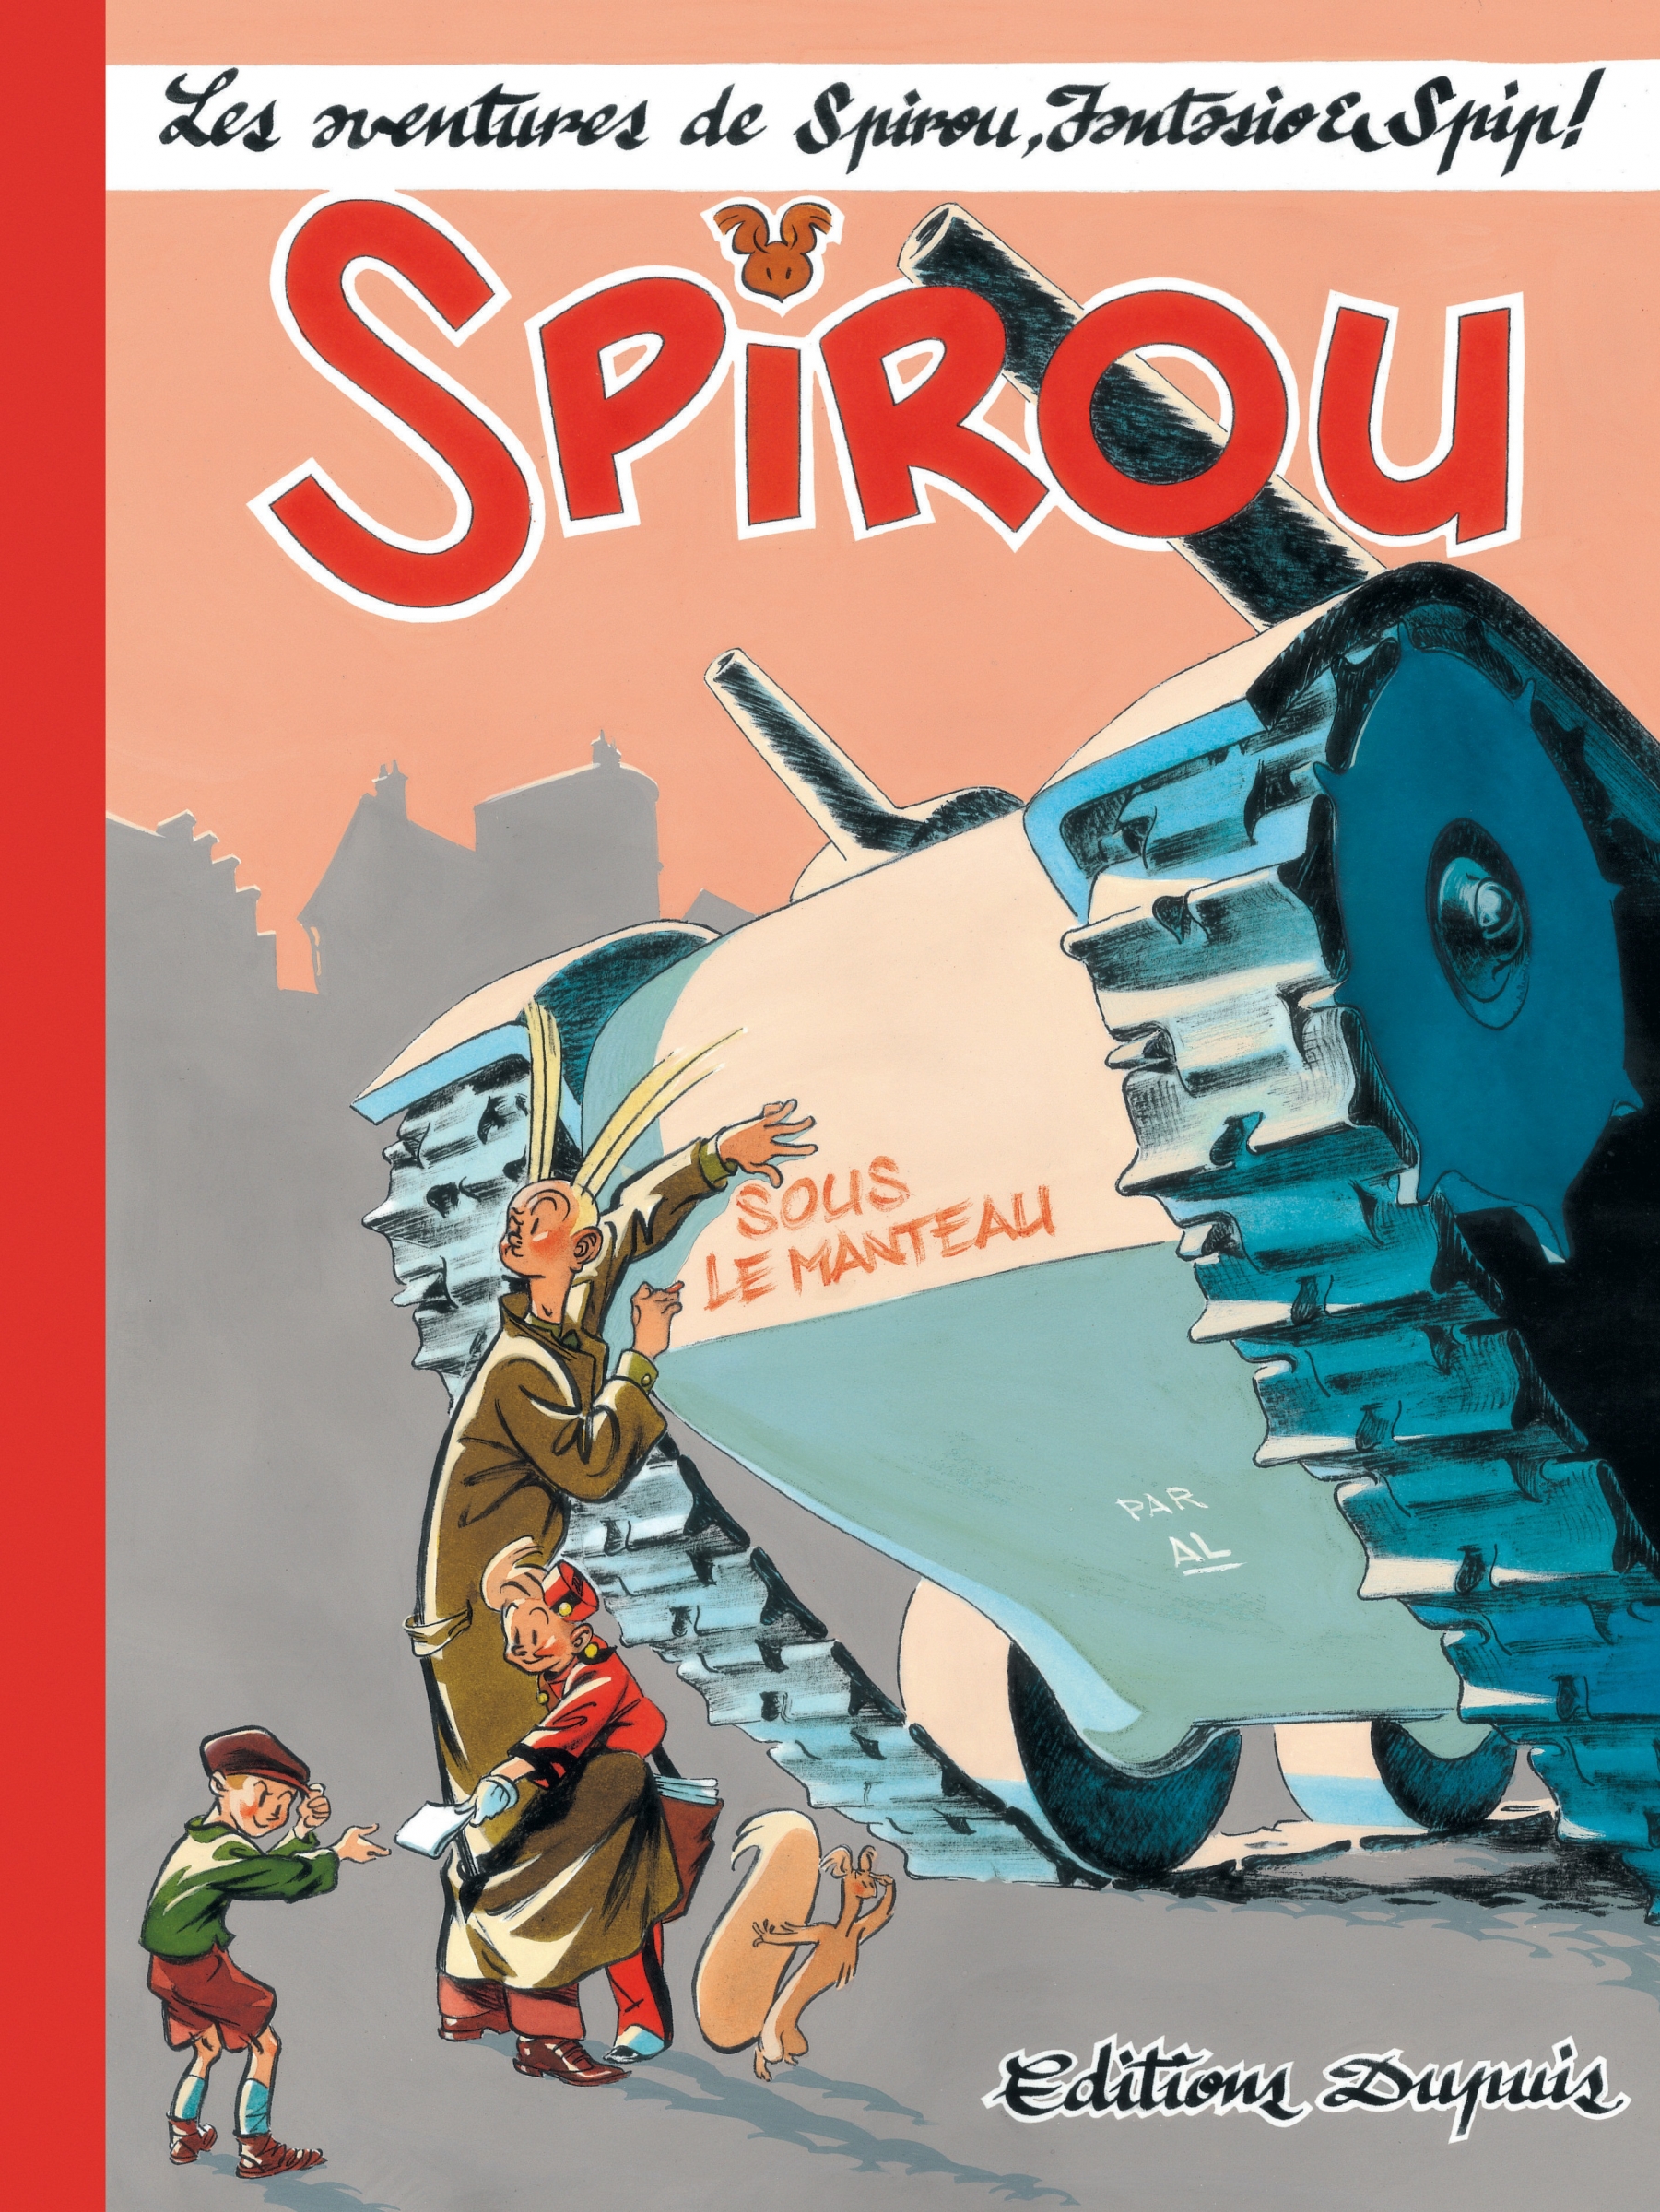 Spirou: Over and under the counter